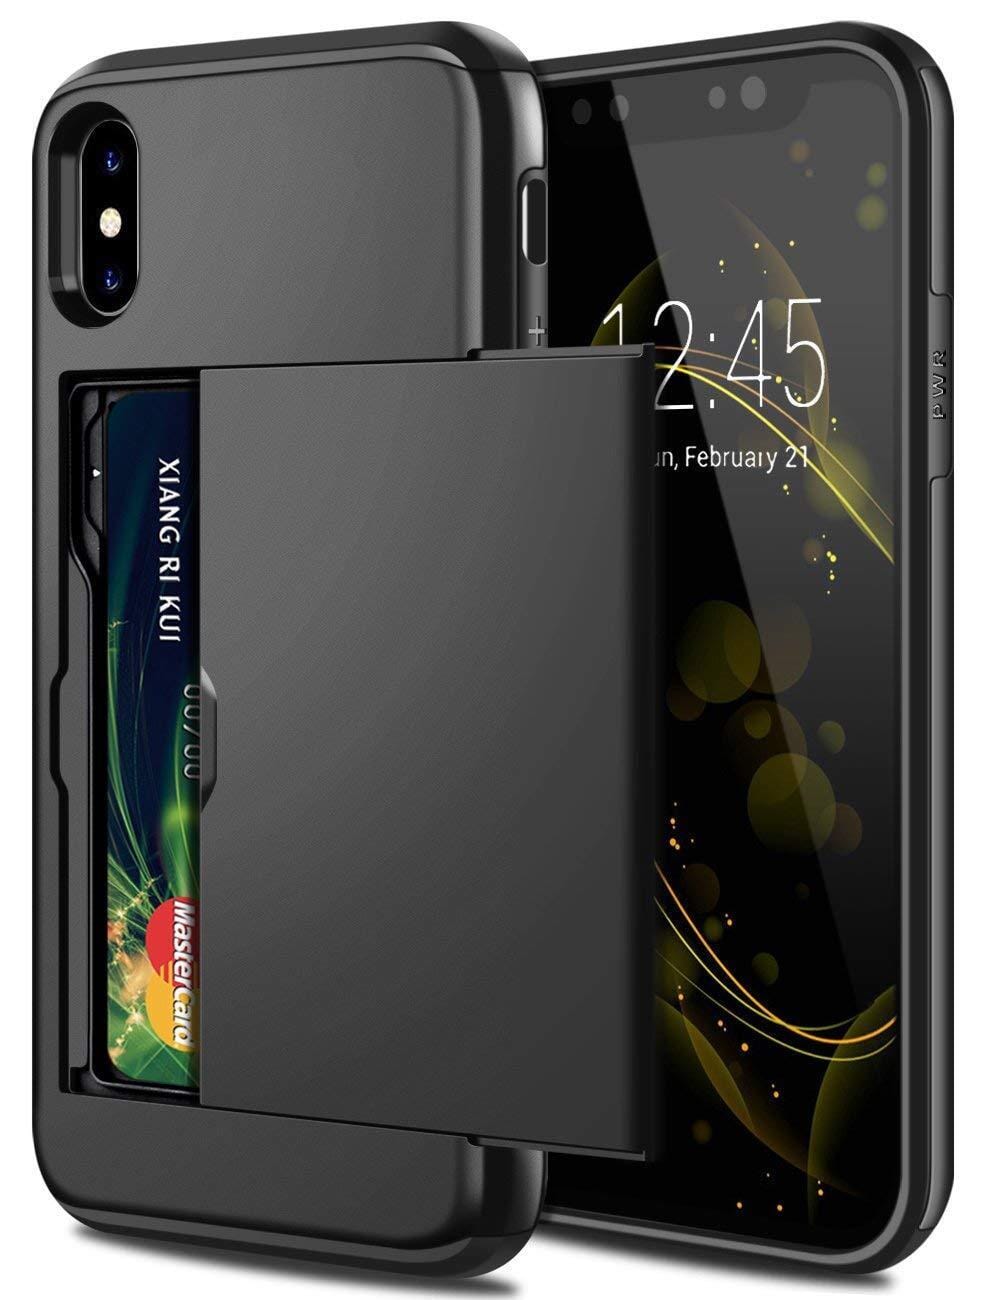 für Apple iPhone X Serie (2 Karten) Mobile Phone cases Md Trade Austria Black For iPhone XS MAX